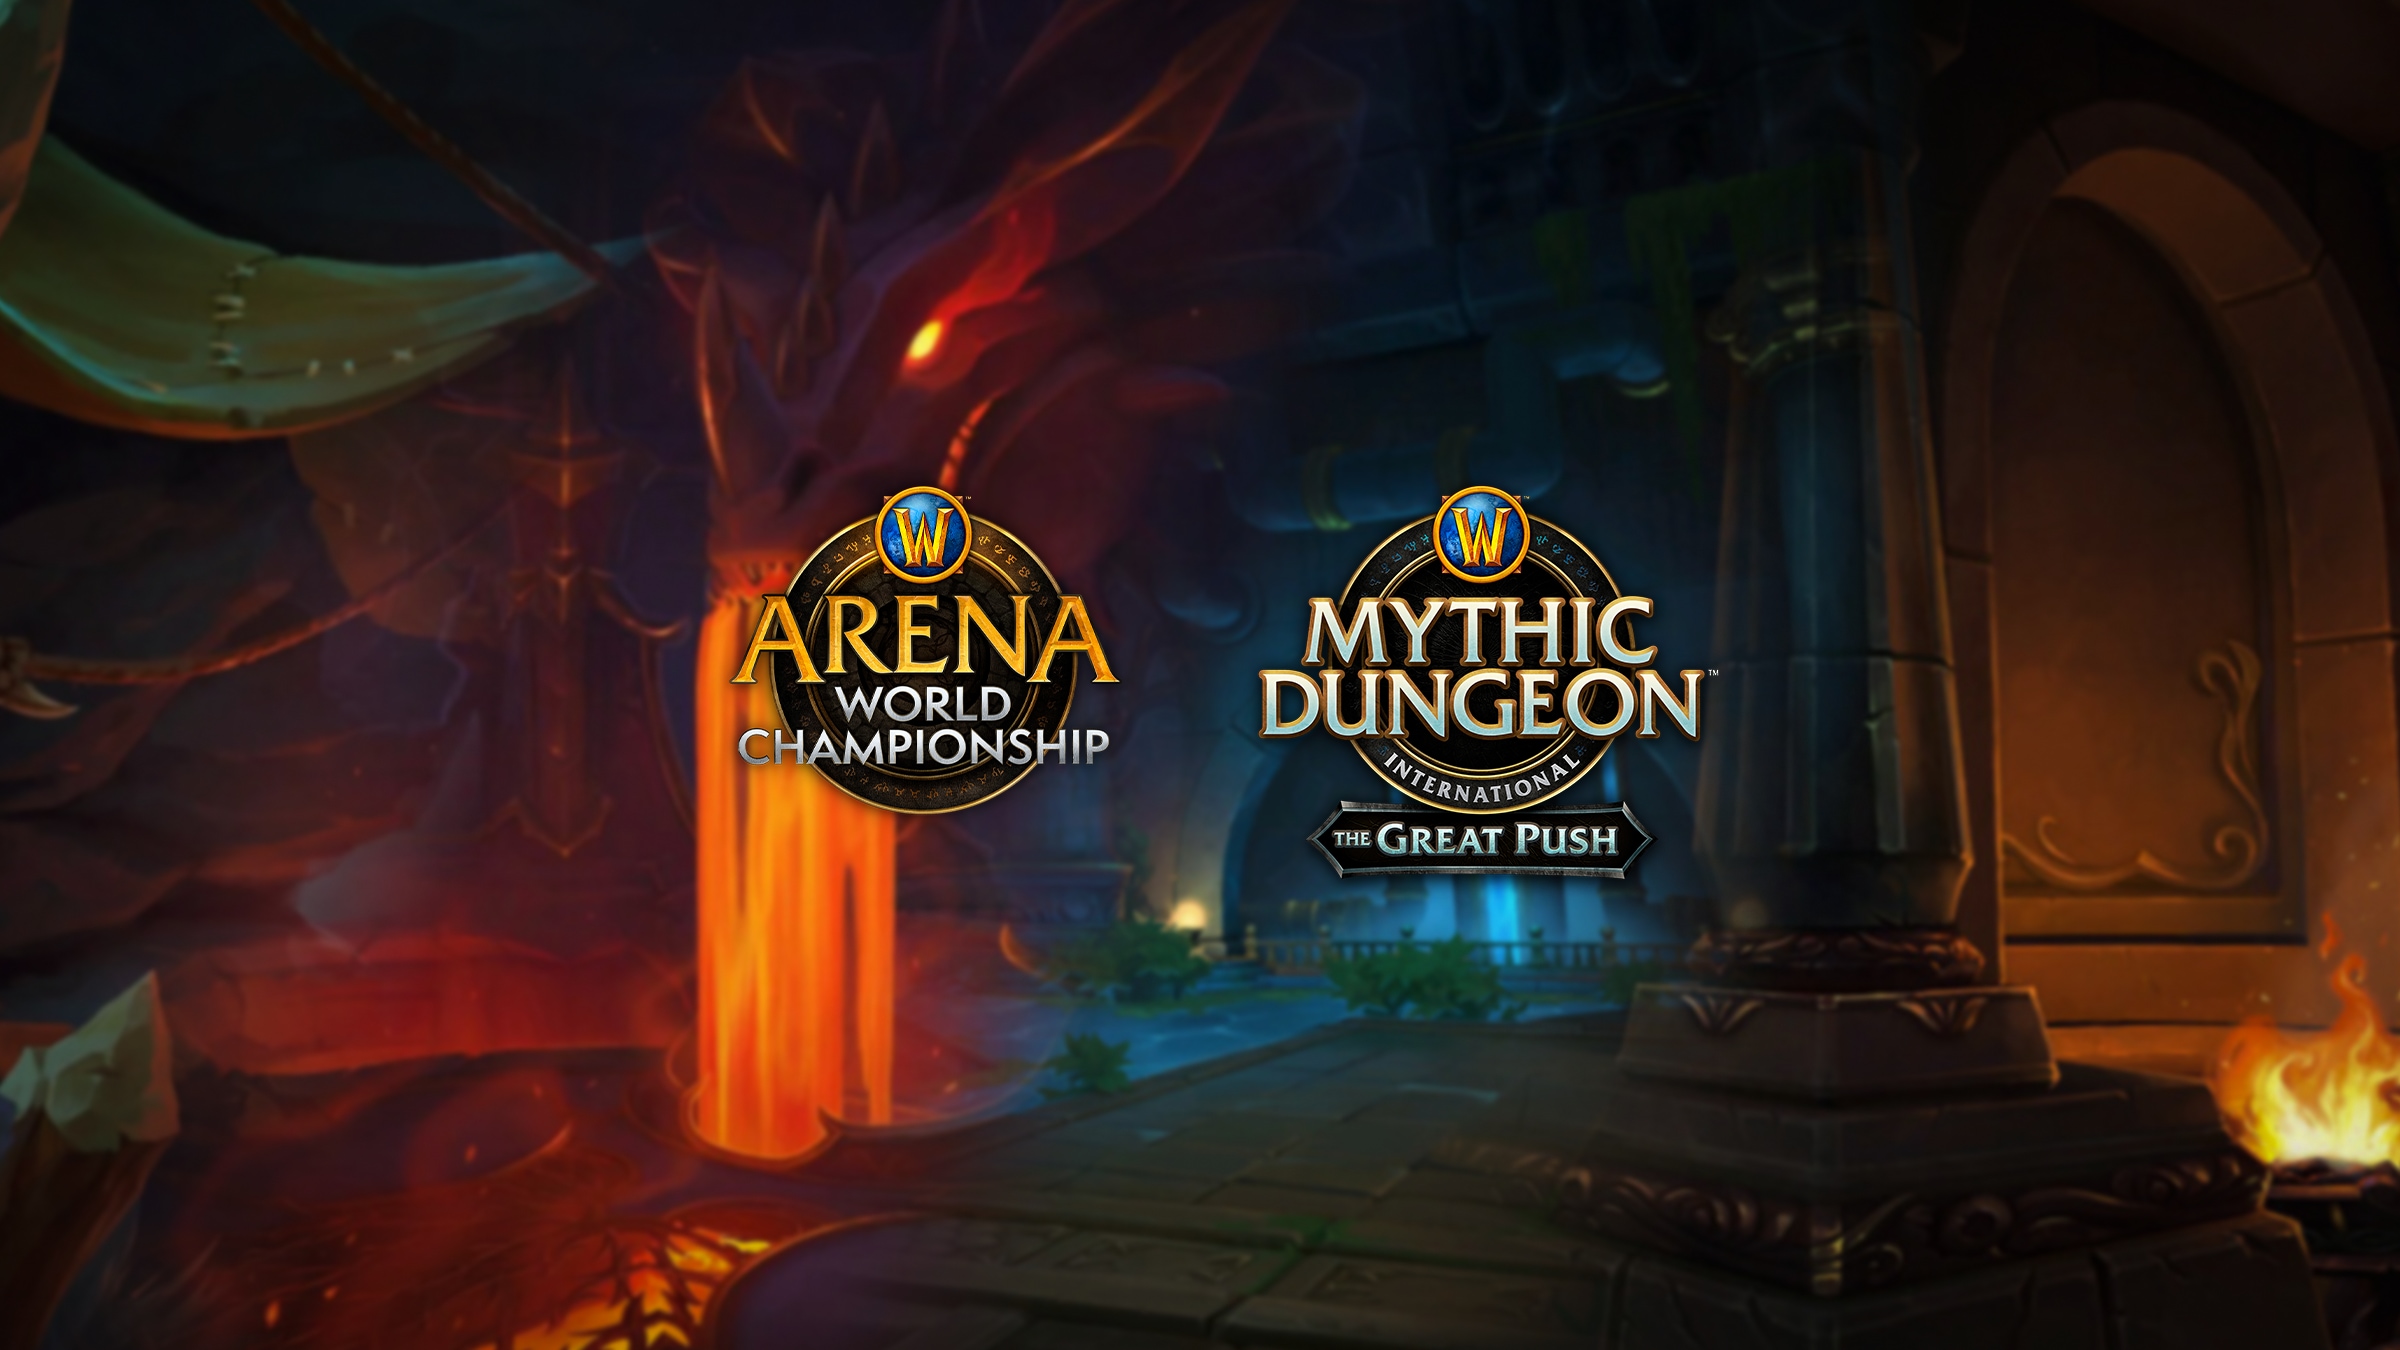 Fly Into Dragonflight Season 2 With The Great Push and Arena World Championship